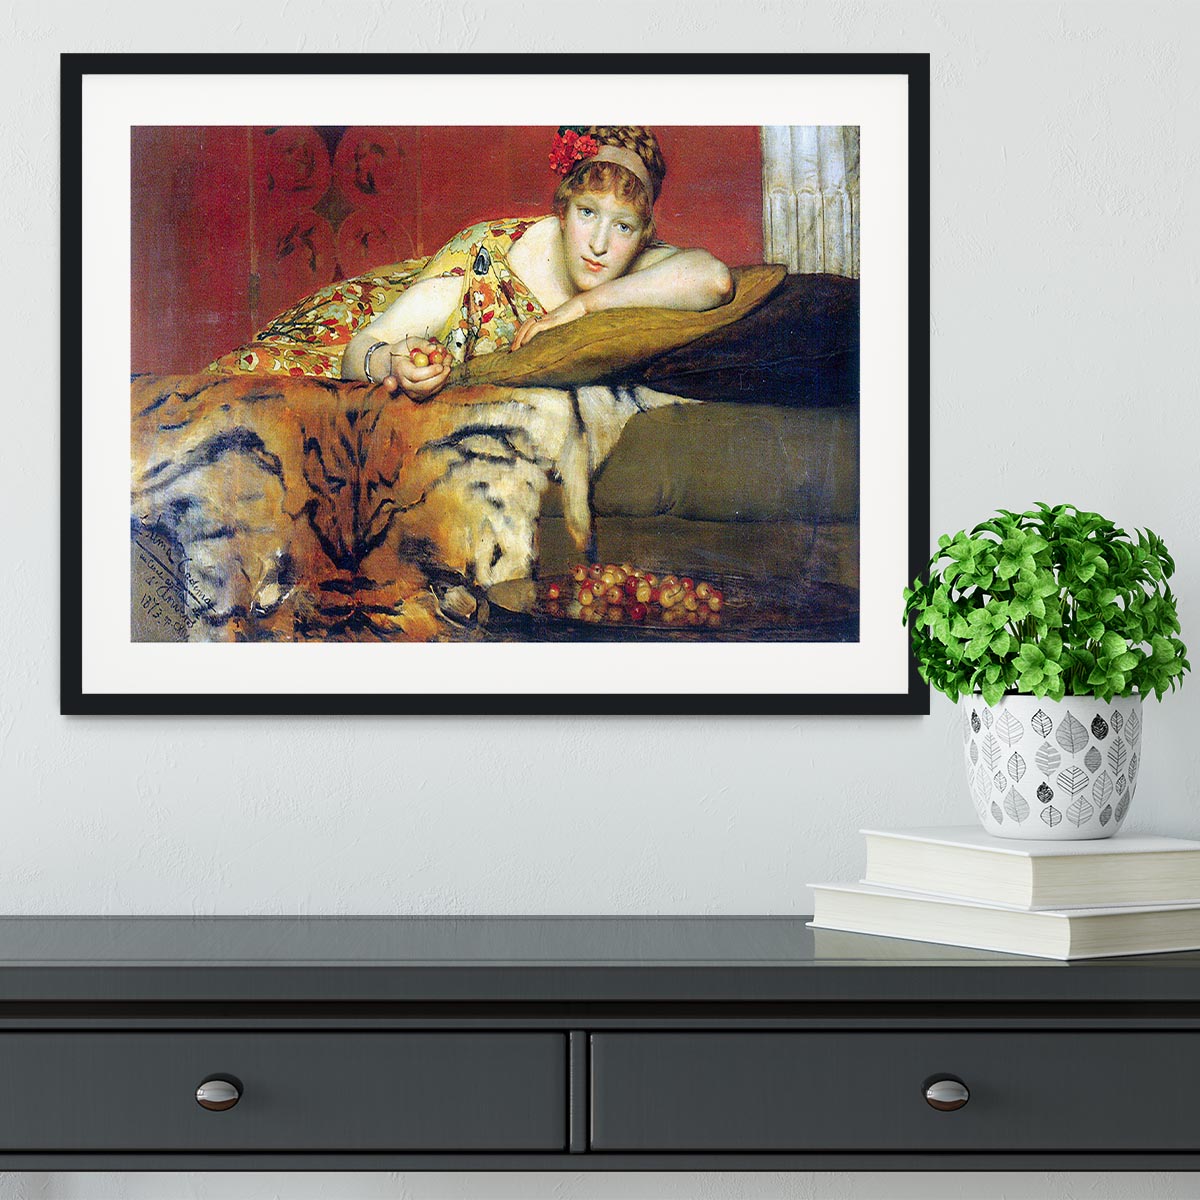 A craving for cherries by Alma Tadema Framed Print - Canvas Art Rocks - 1